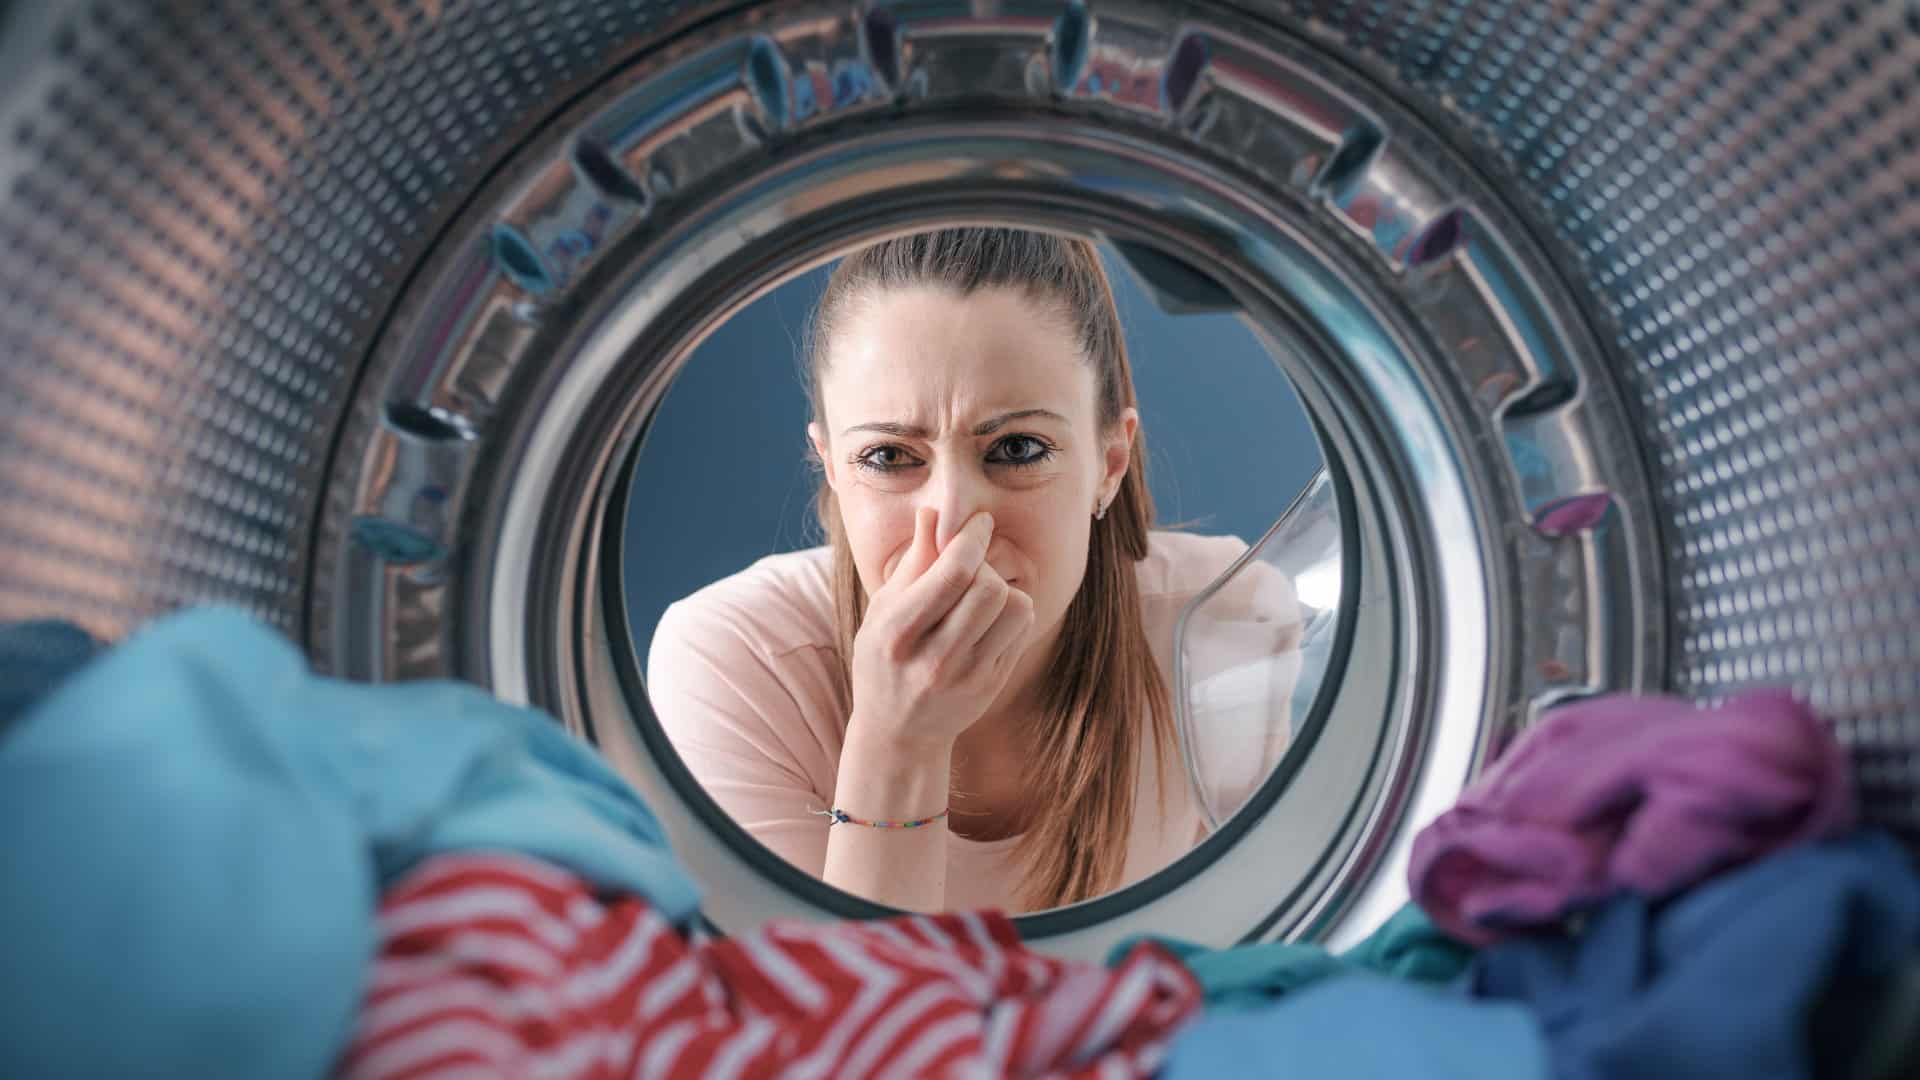 Featured image for “Washing Machine Smells? Common Reasons and Solutions”